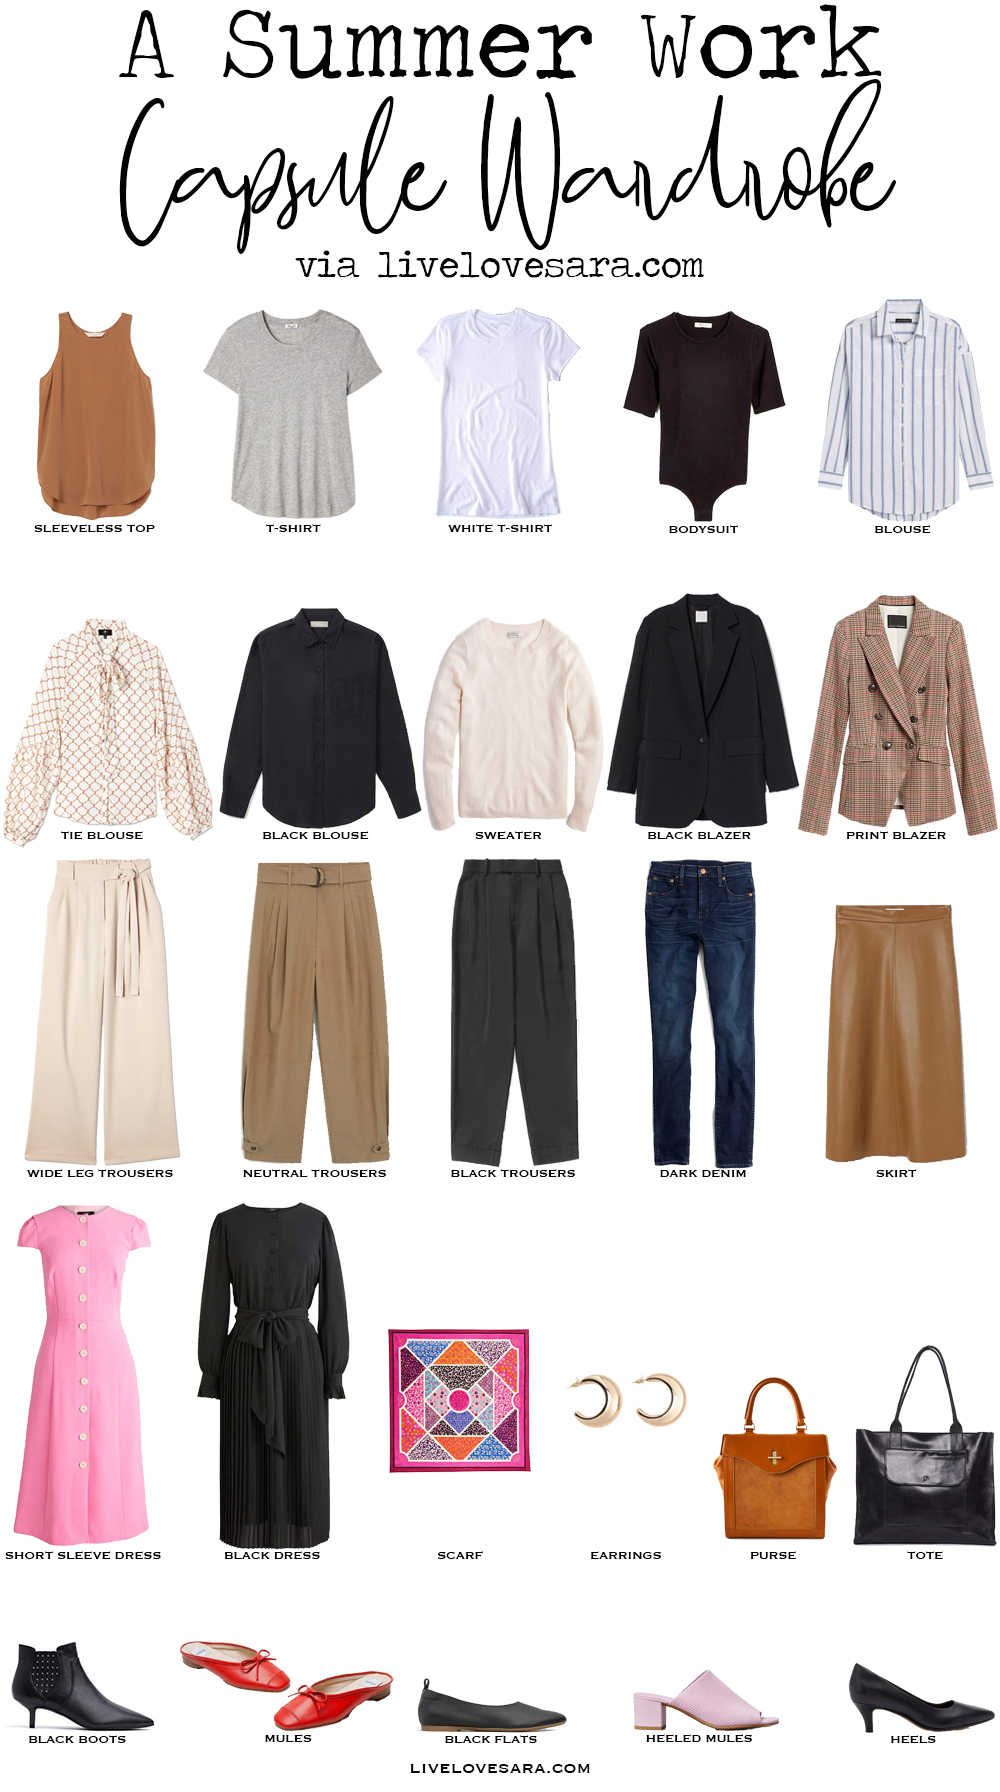 How to Build a Summer Work Capsule Wardrobe | Capsule Wardrobe for Spring | spring Wardrobe | spring Capsule Wardrobe | Summer Capsule | Minimalist capsule | Minimalist Capsule Wardrobe | Summer Capsule wardrobe | Work Outfit Ideas | Work Wardrobe | Minimalist Outfit Ideas |